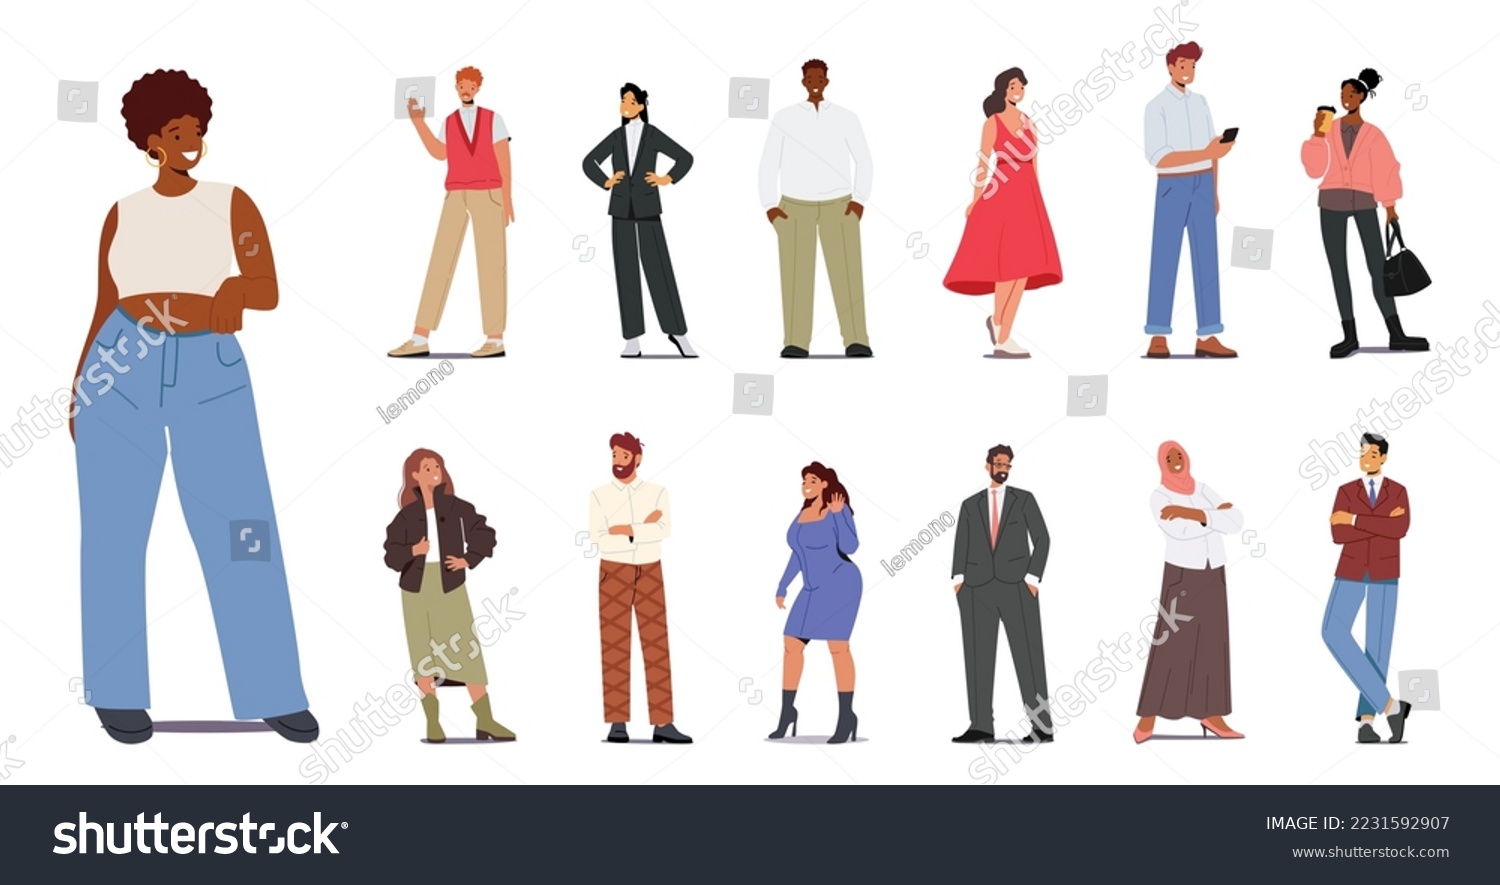 SVG of Set Stylish Multinational People. Male and Female Characters, Caucasian, Arab, African or Asian Men and Women Wear Trendy Clothes. Multiethnic Persons in Modern Apparel. Cartoon Vector Illustration svg